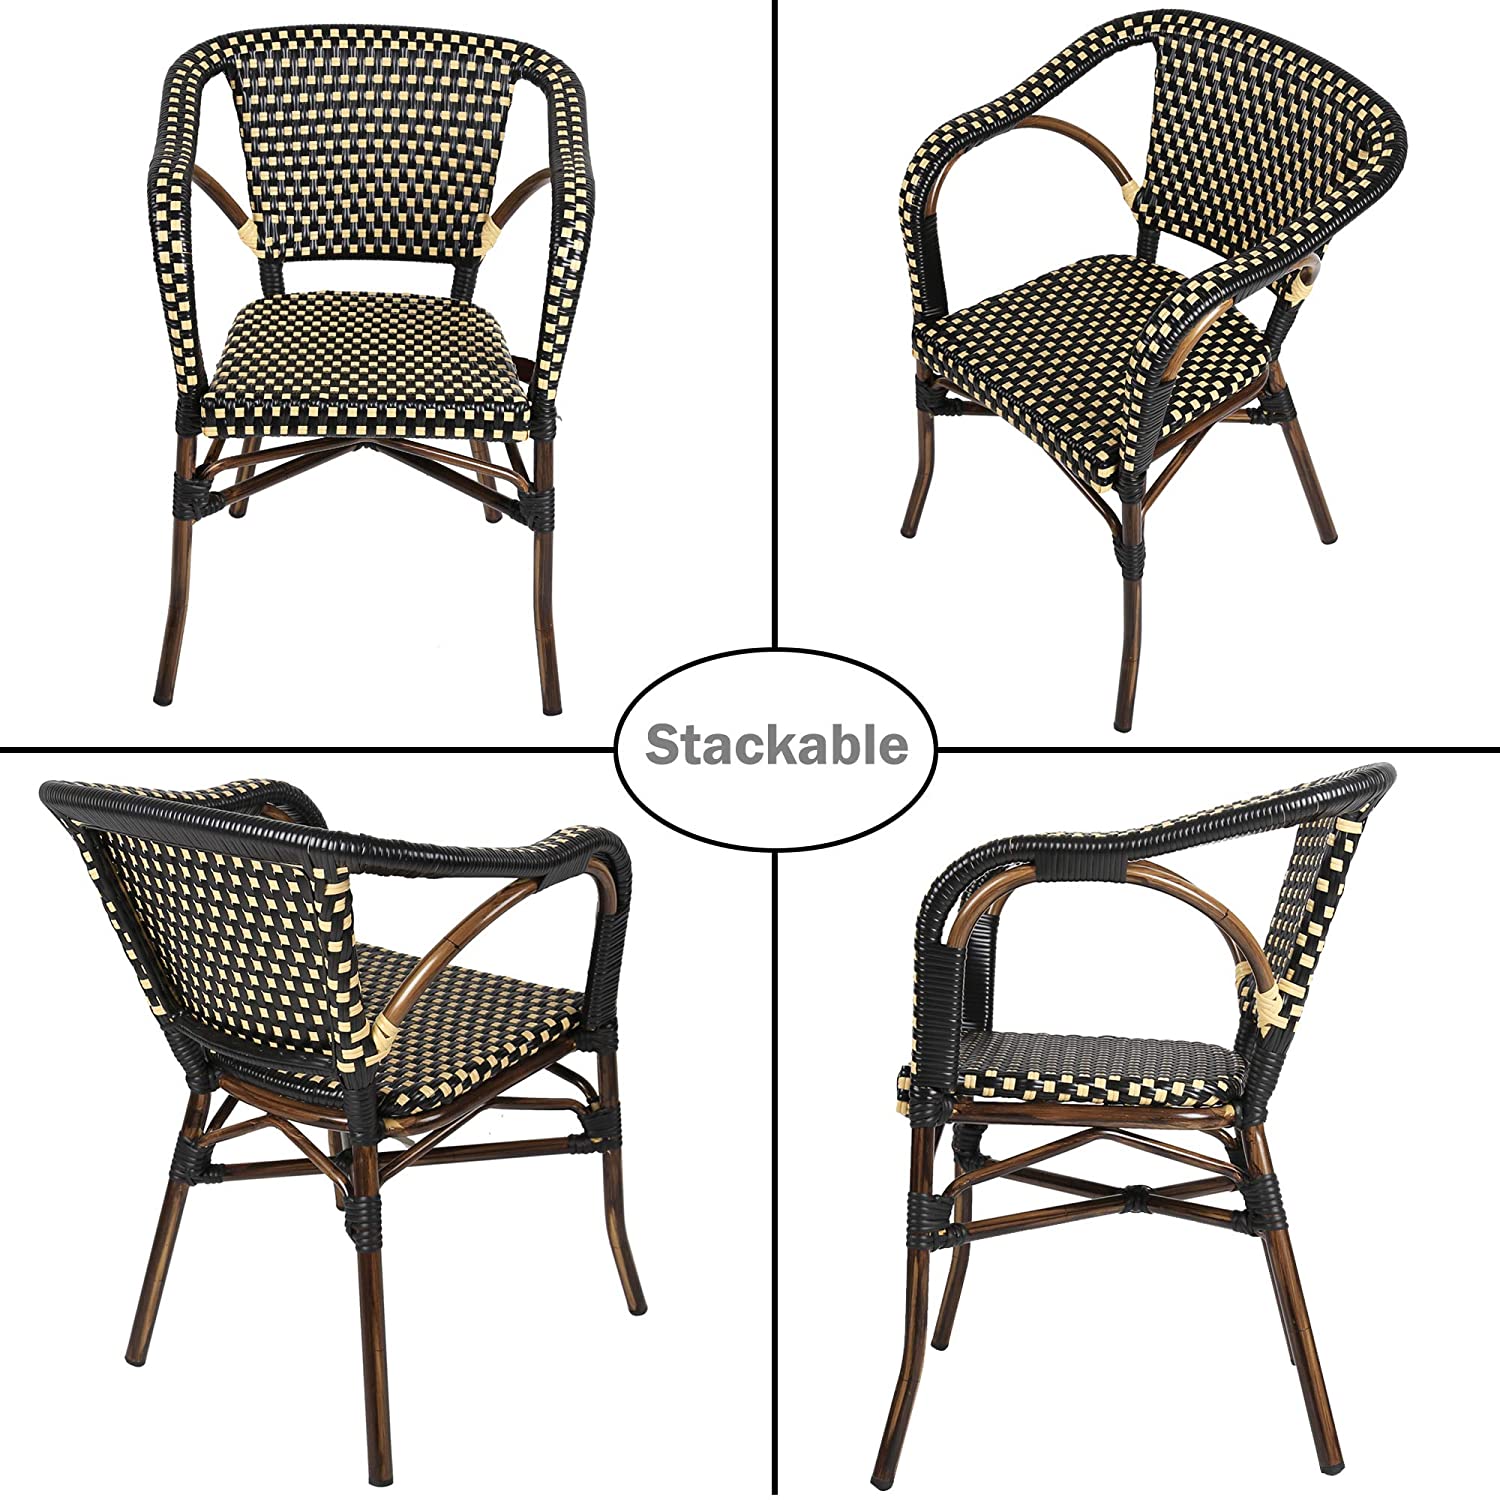 Outdoor Rattan Wicker Chair Set of 4 Stackable Arm Chairs with Aluminum Frame Patio Dining Chair for Backyard Porch Garden, Black/Cream